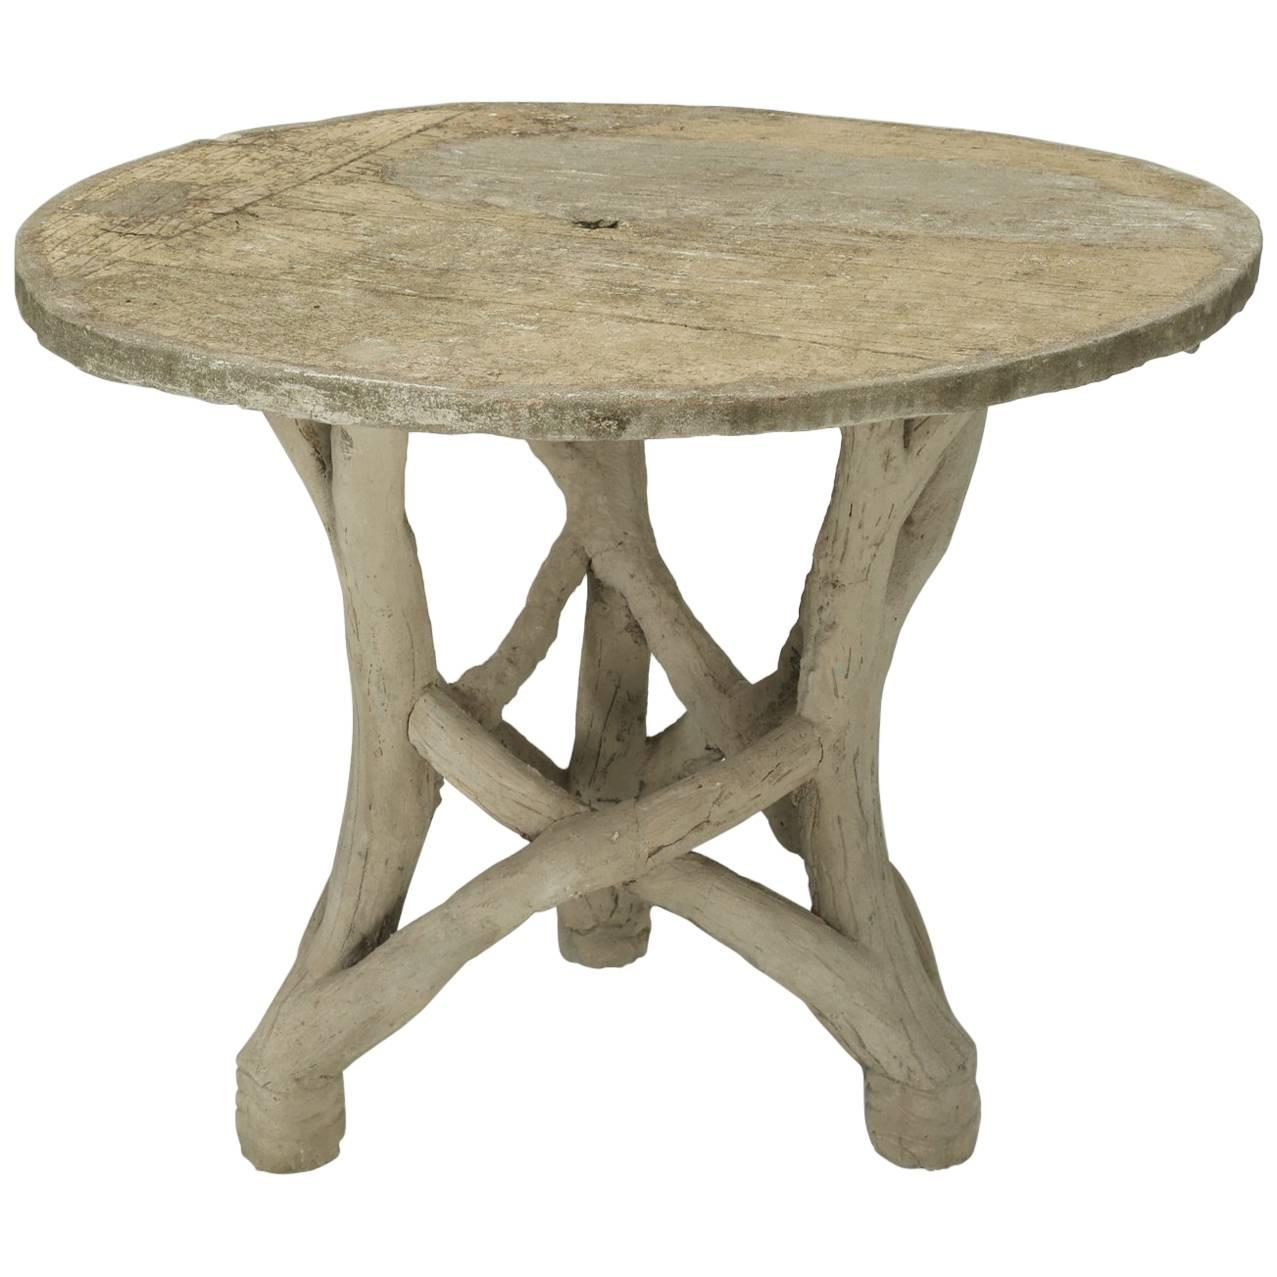 Faux Bois Table Attributed to Edouard Redont, circa 1900